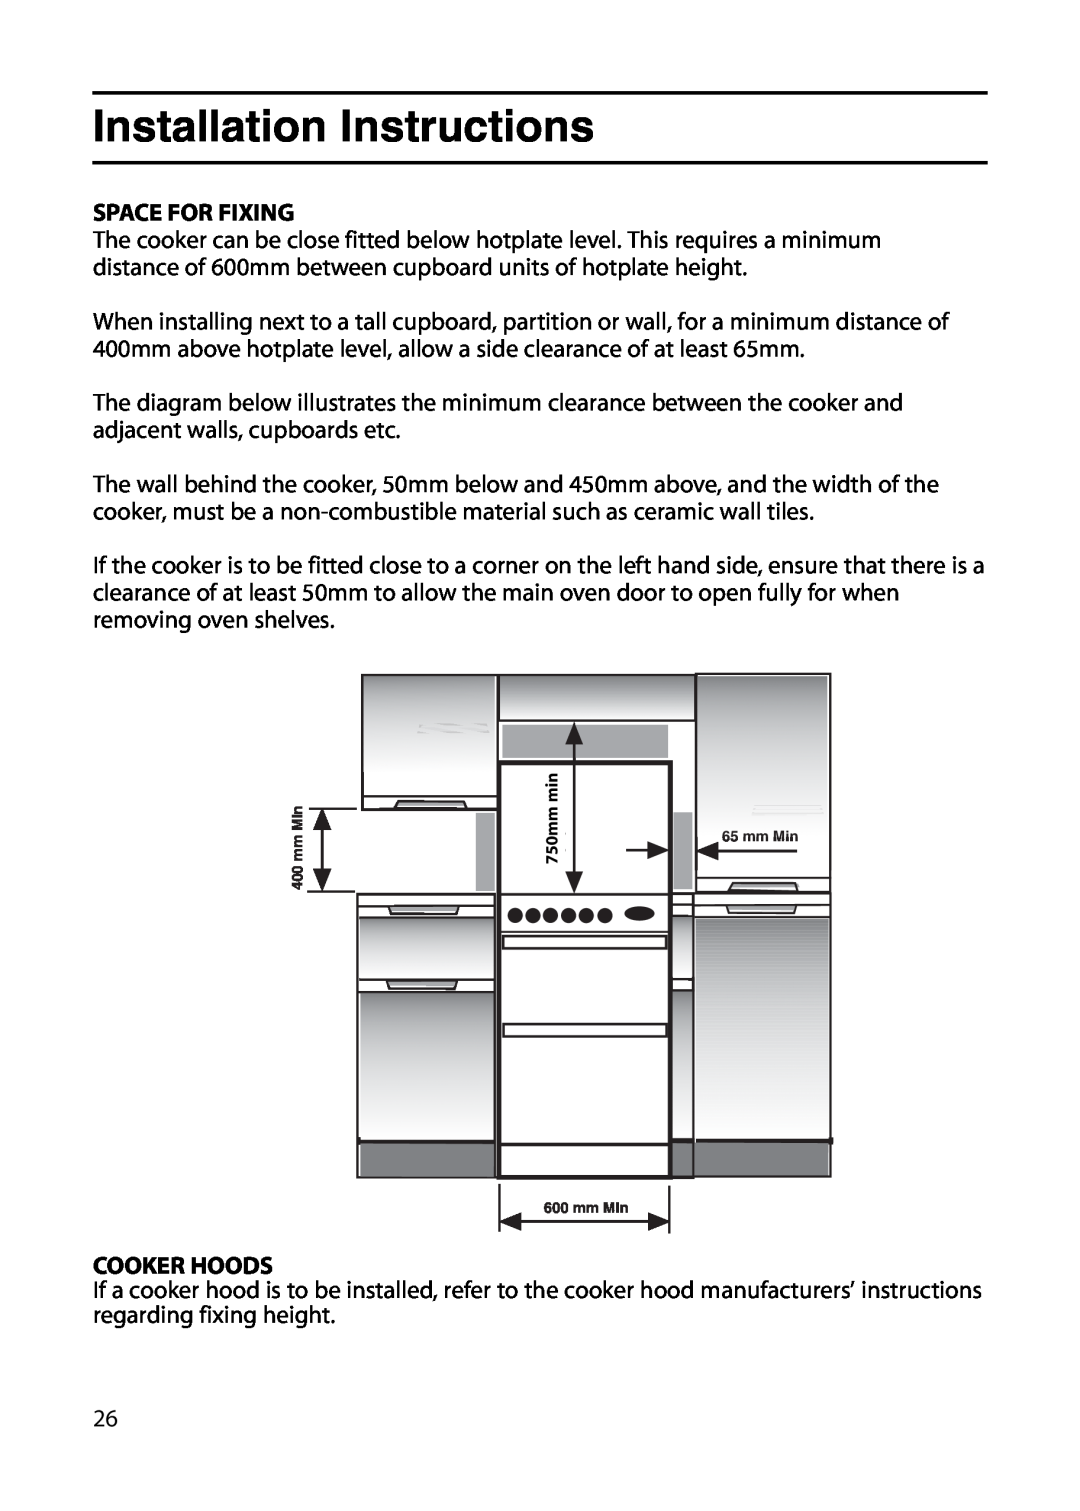 Indesit KD6G25M, KD6G25W manual Space For Fixing, Cooker Hoods, Installation Instructions, 750mm 